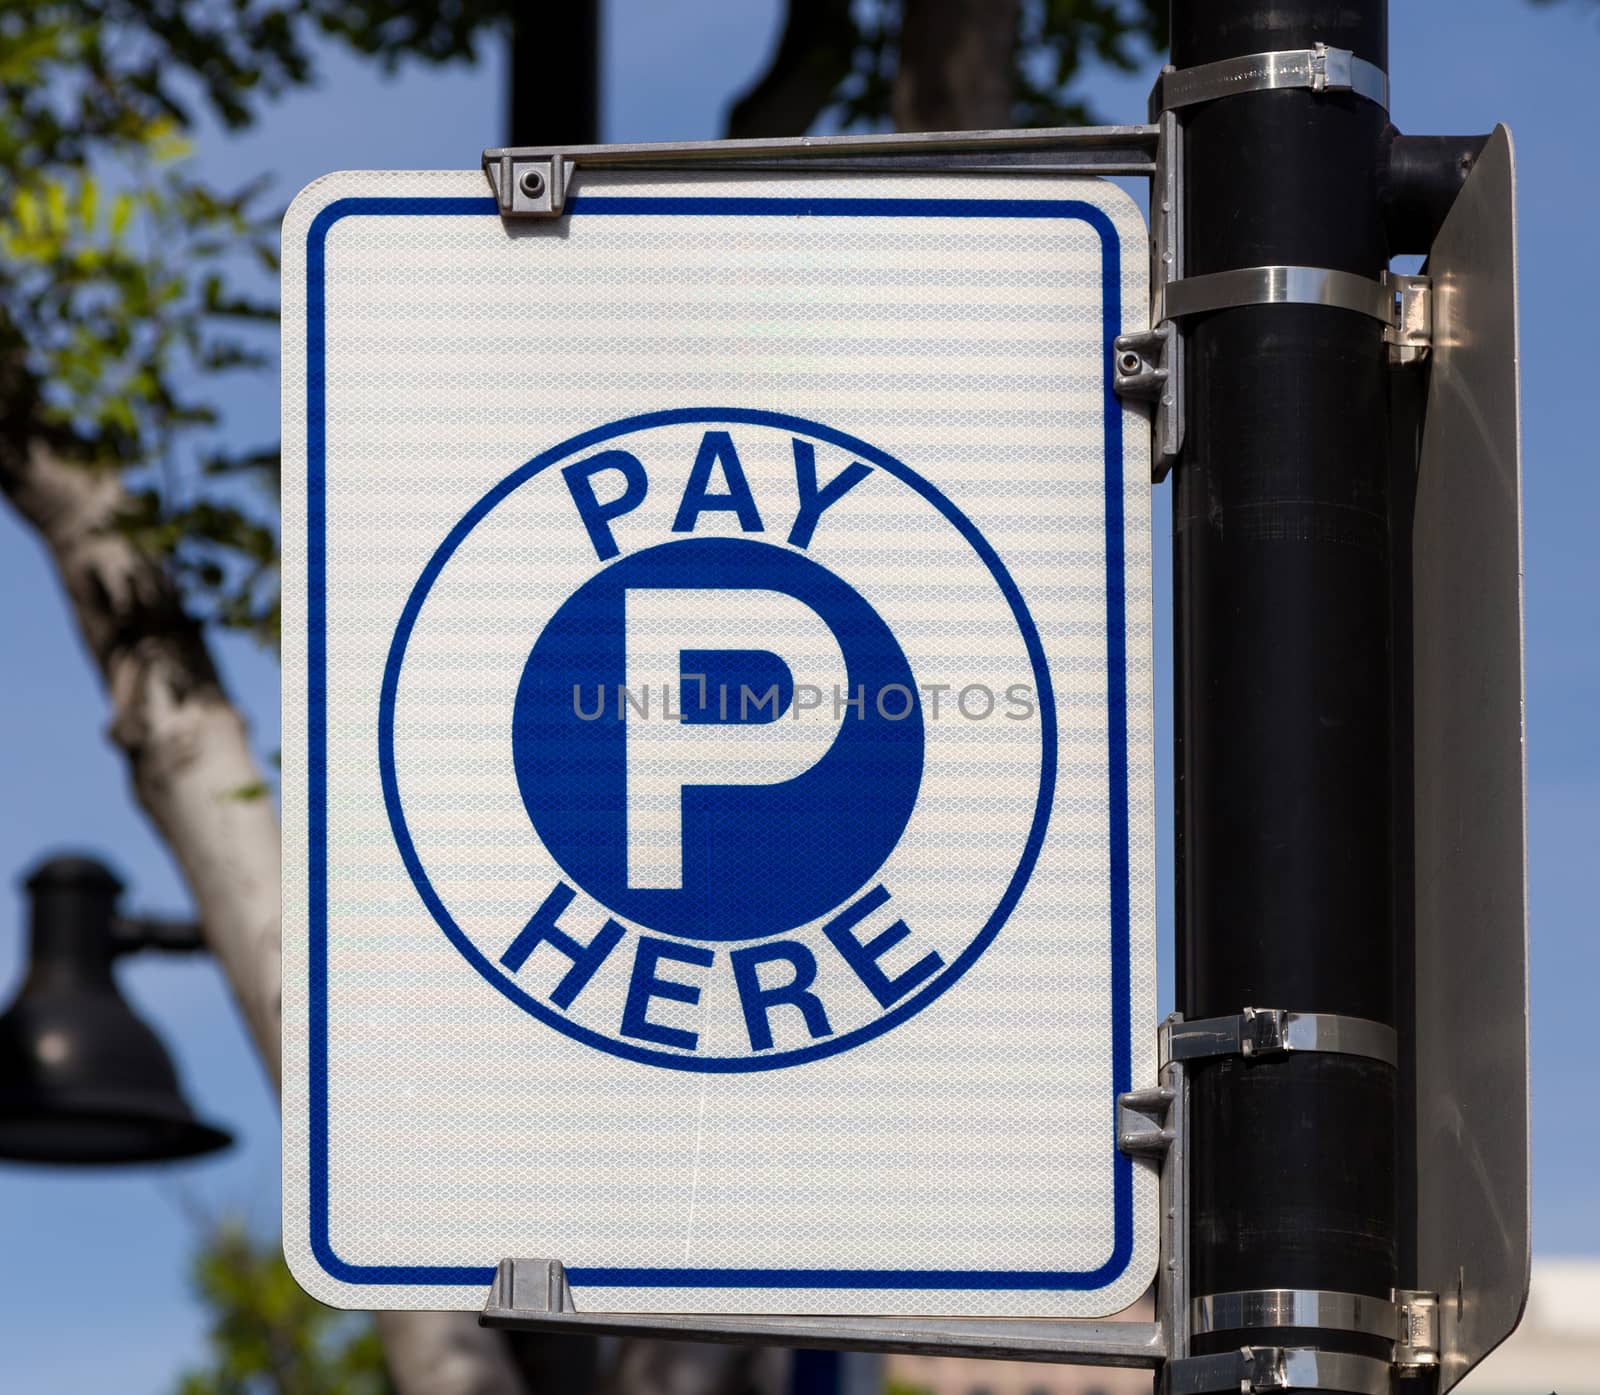 Municipal parking meter sign with blue letter on white background.